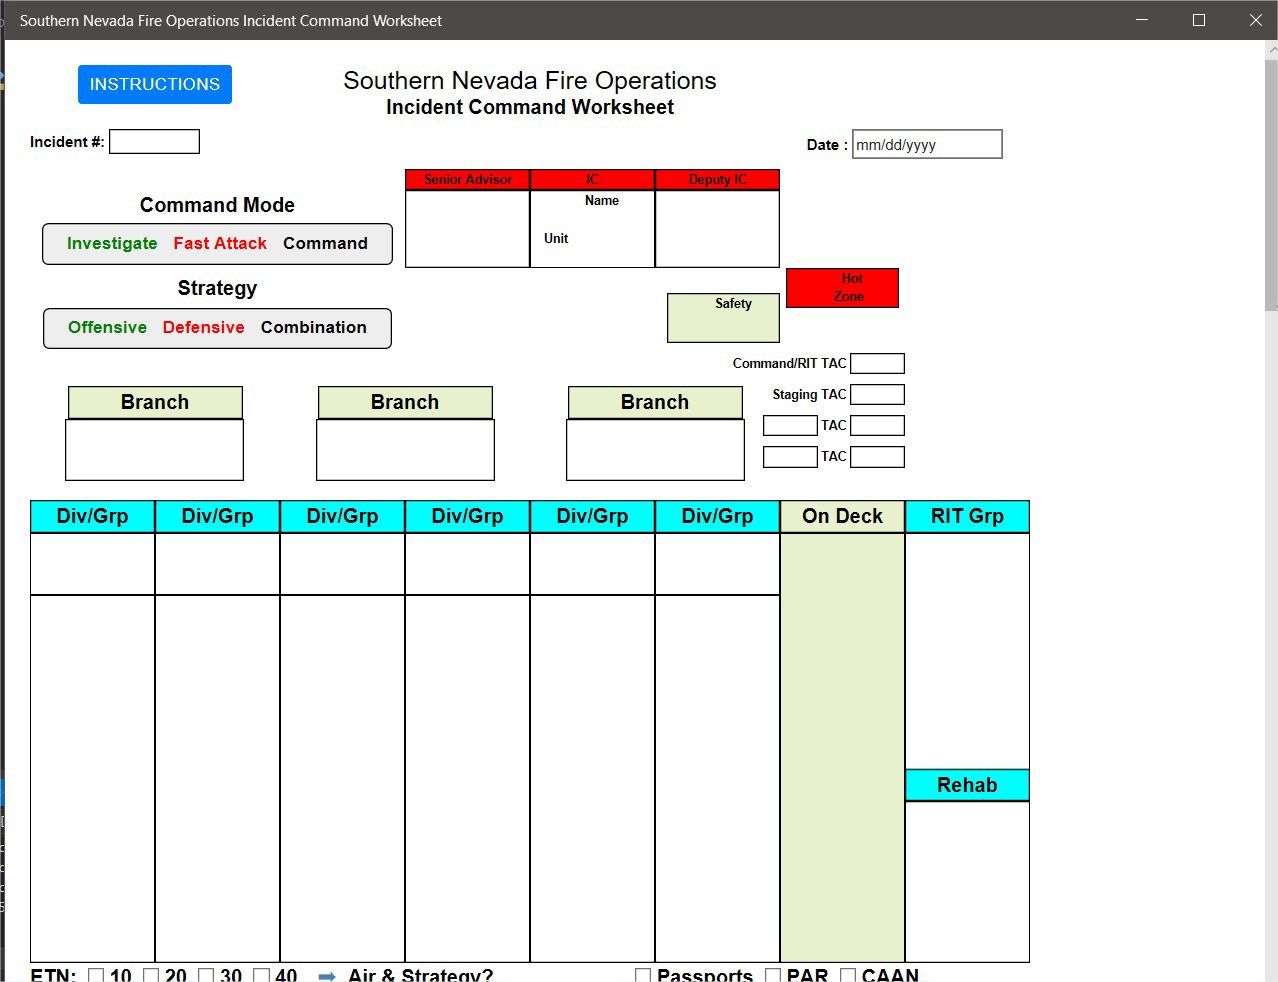 Southern Nevada Fire Operations Incident Command Worksheet